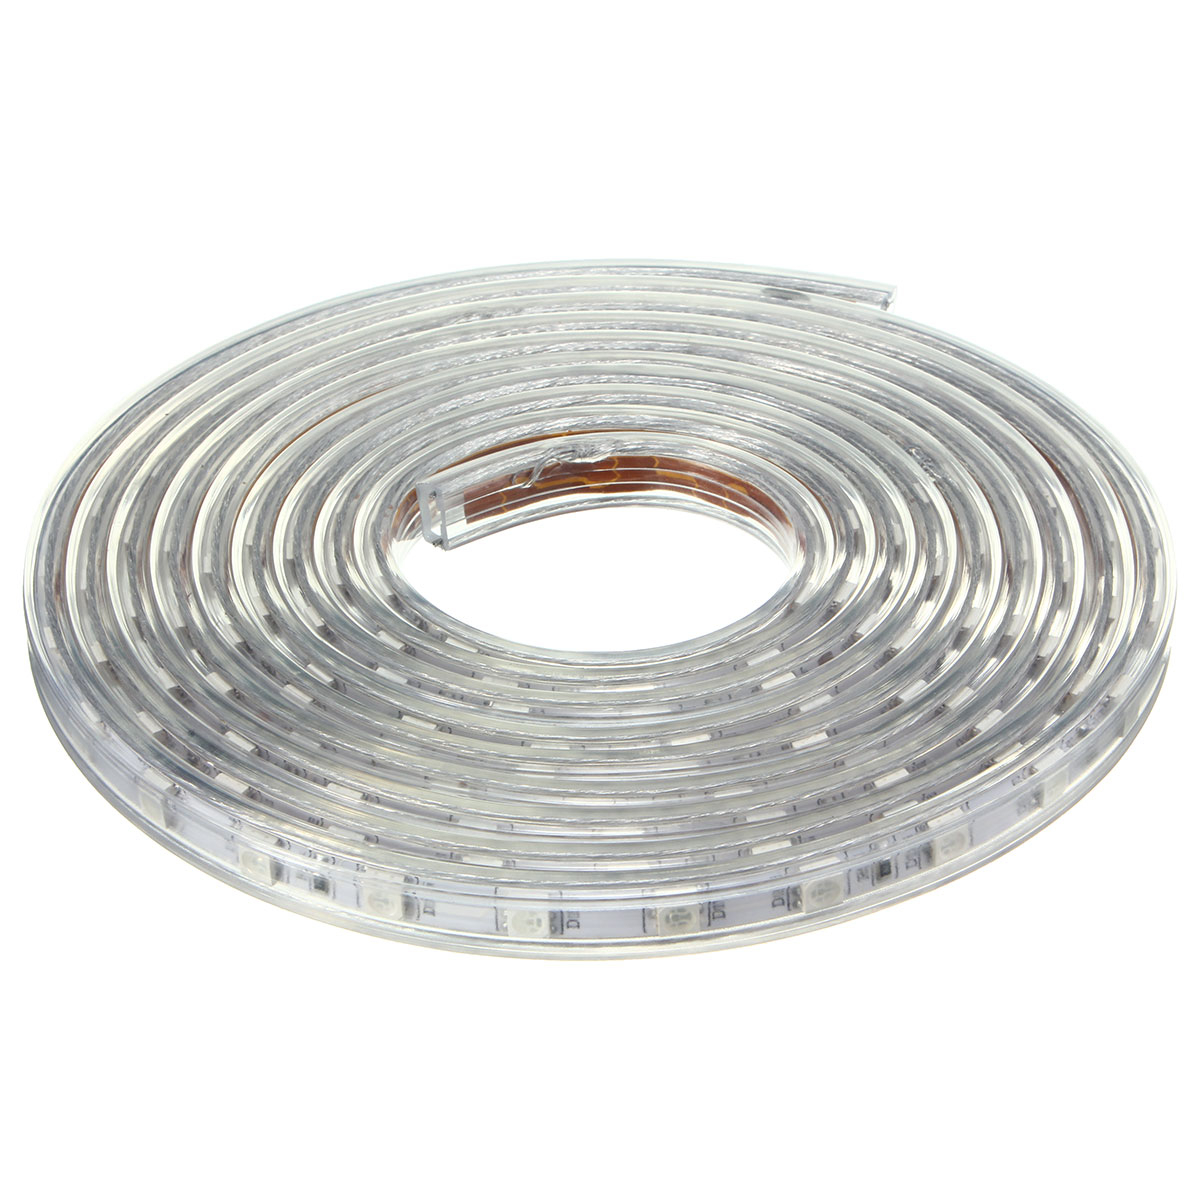 220V-3M-5050-LED-SMD-Outdoor-Waterproof-Flexible-Tape-Rope-Strip-Light-Xmas-1066318-2